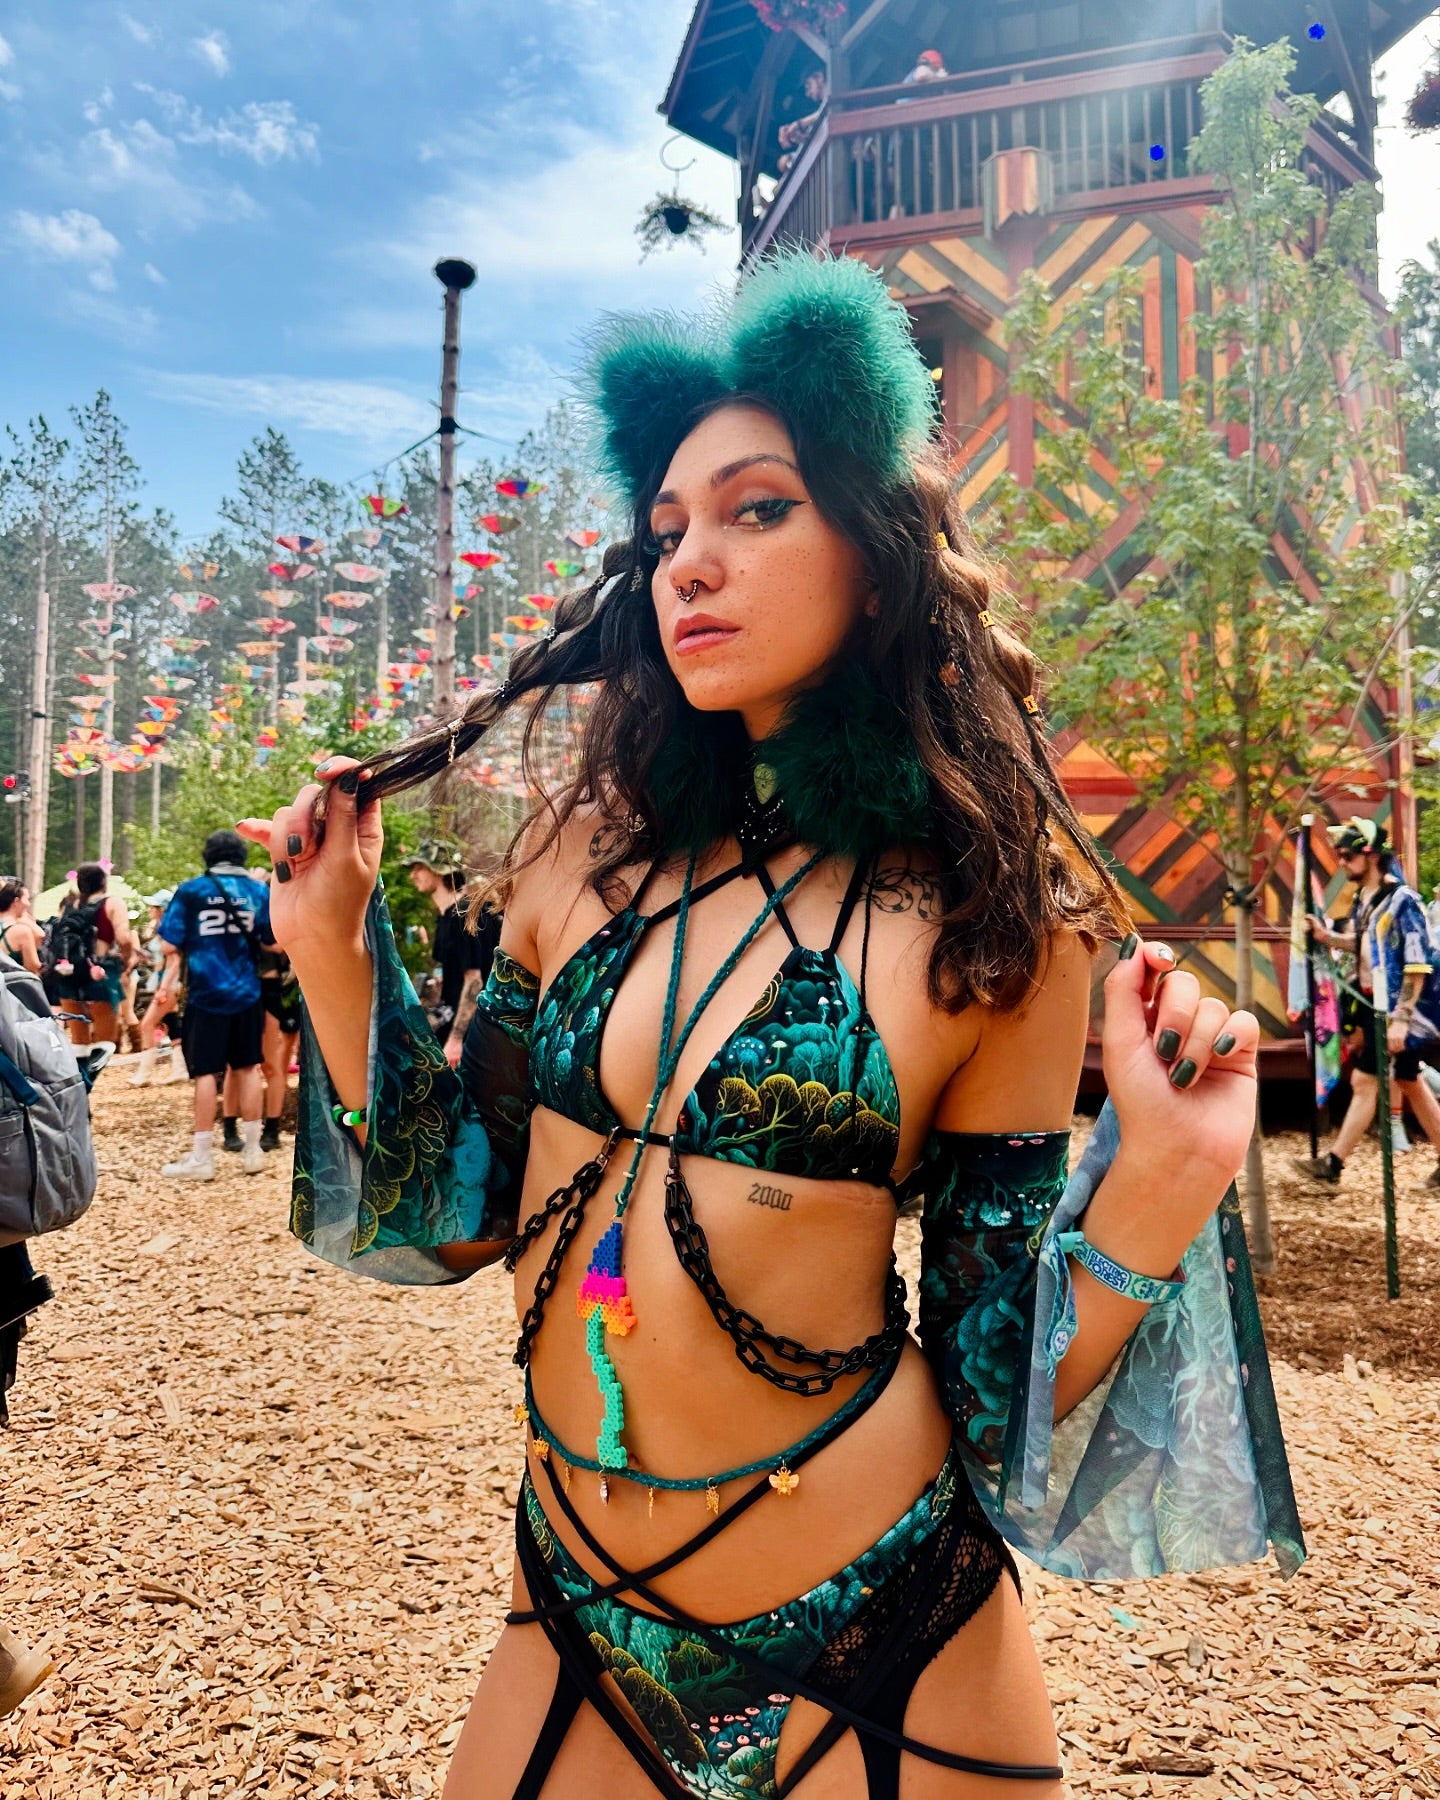 Festival-goer in a green, forest-themed rave outfit with flared sleeves and cat ears poses confidently at a vibrant, outdoor festival